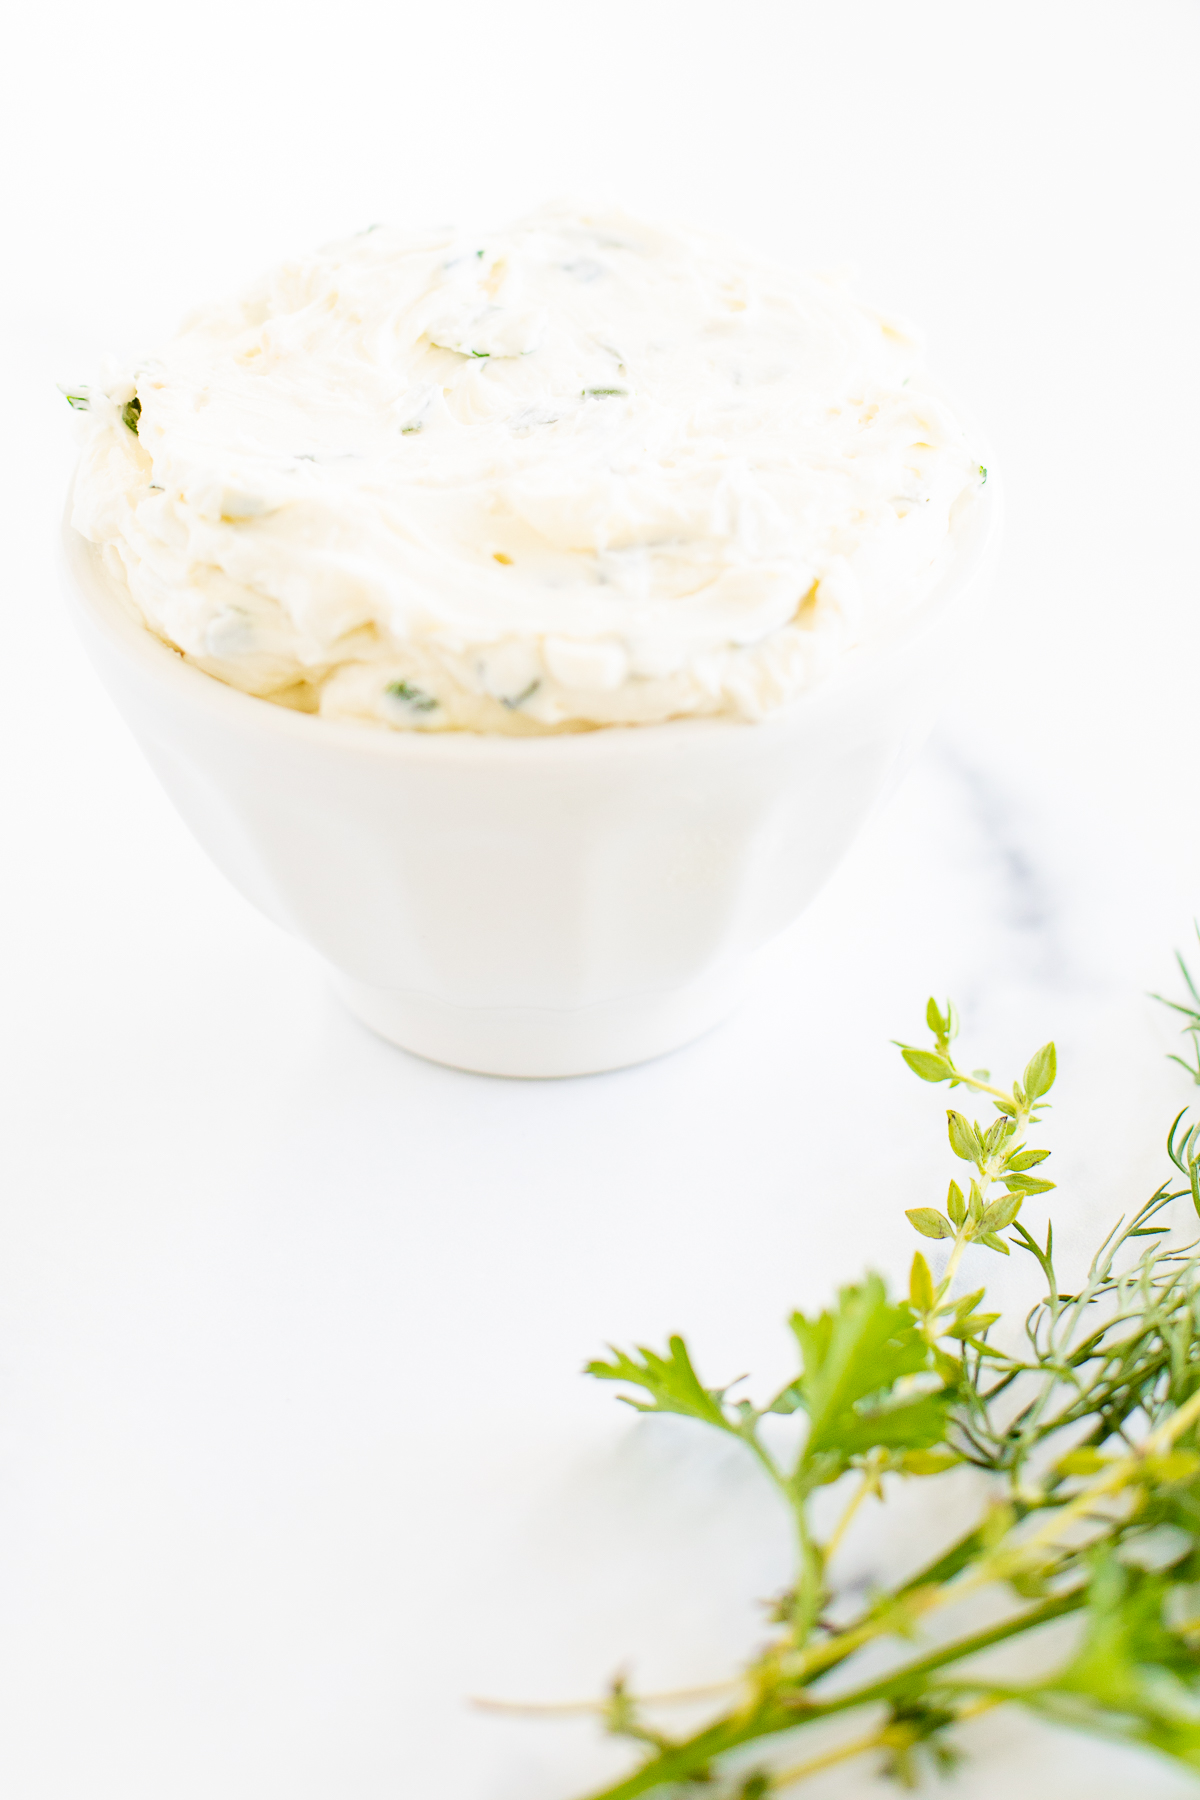 A white bowl of garlic and herb cream cheese on a marble countertop.